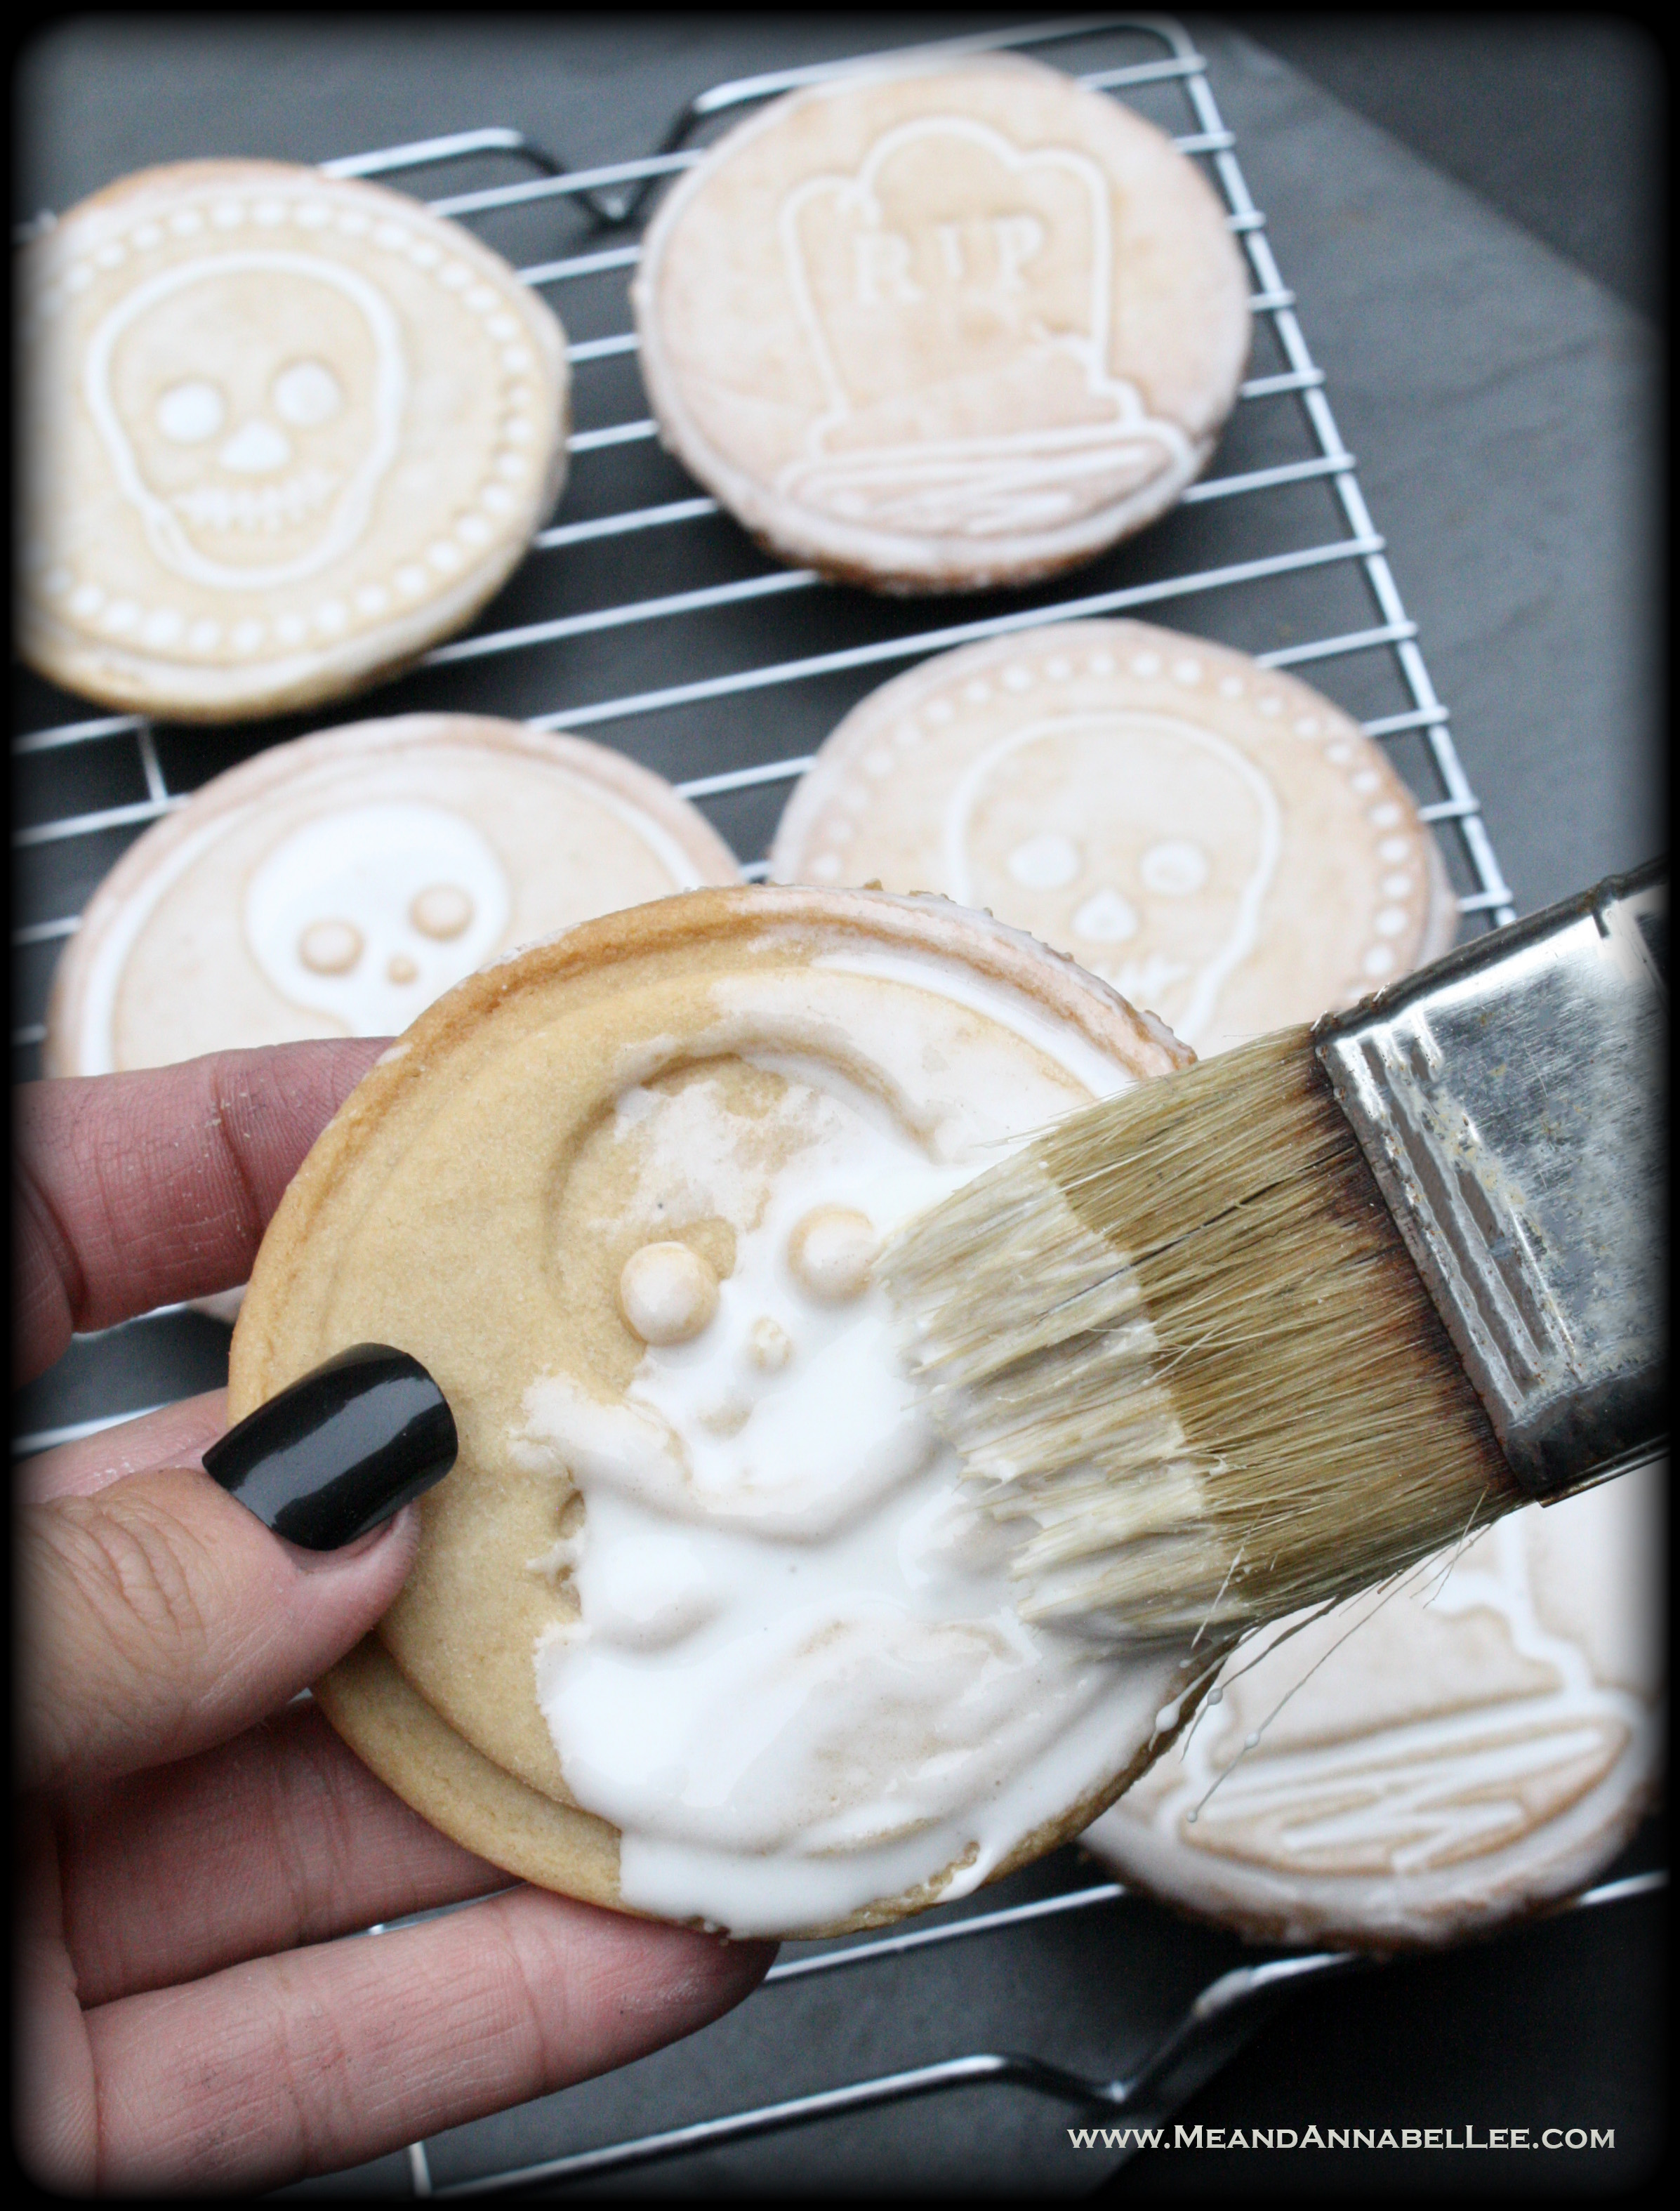 Halloween Stamped Cookies | Rest in Peace | Skull Stamps | Almond Vanilla Sugar Cookie Recipe | Royal Flood Icing | www.MeandAnnabelLee.com